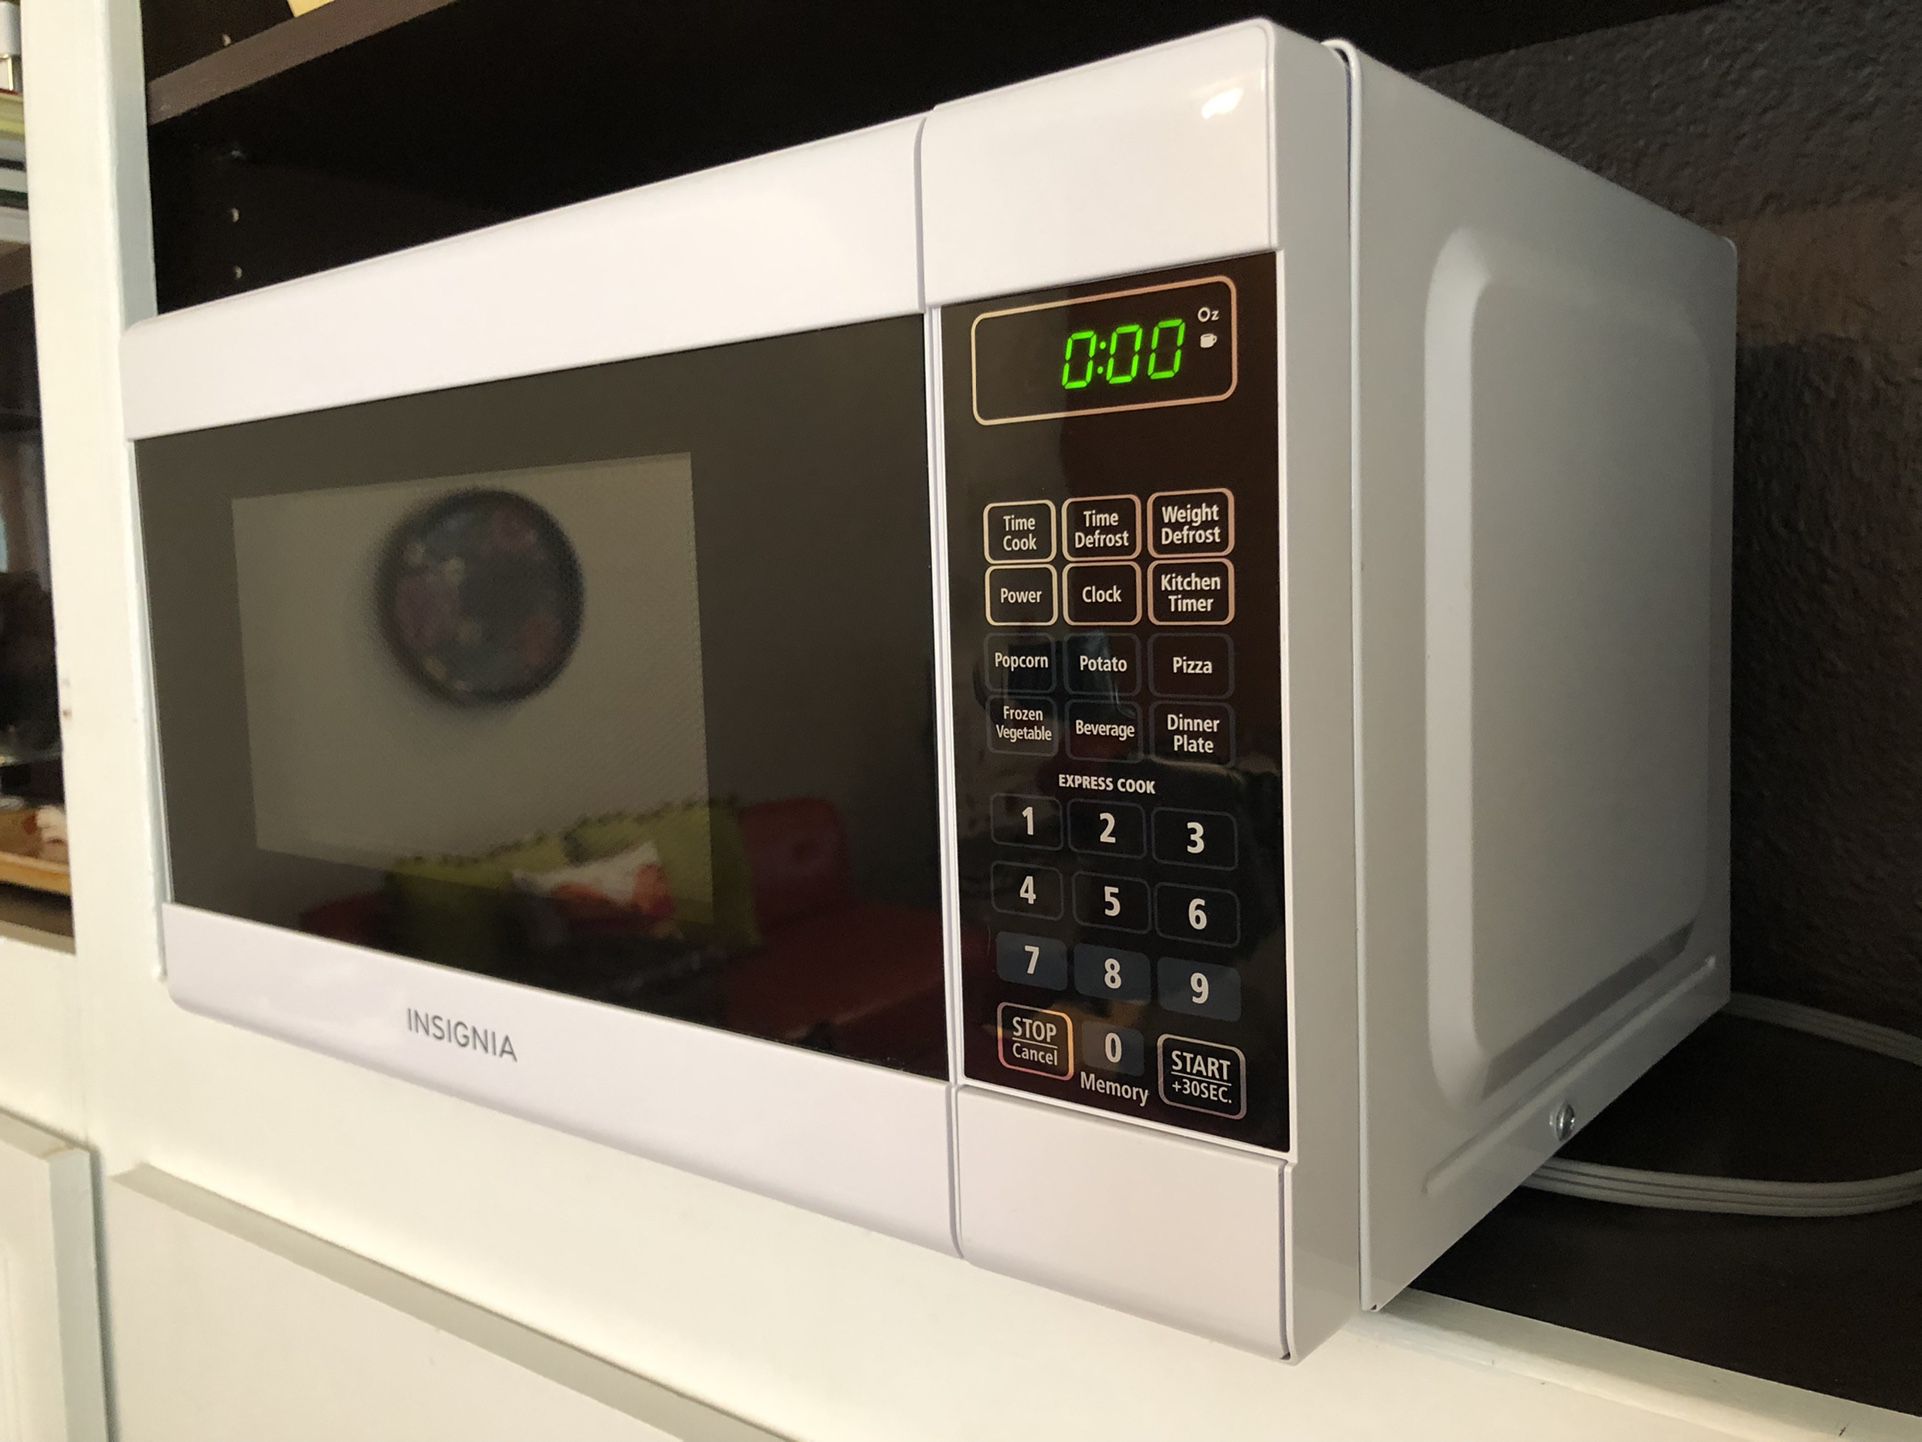 Insignia Microwave 17 X 12 X9.5 for Sale in Palm Coast, FL - OfferUp